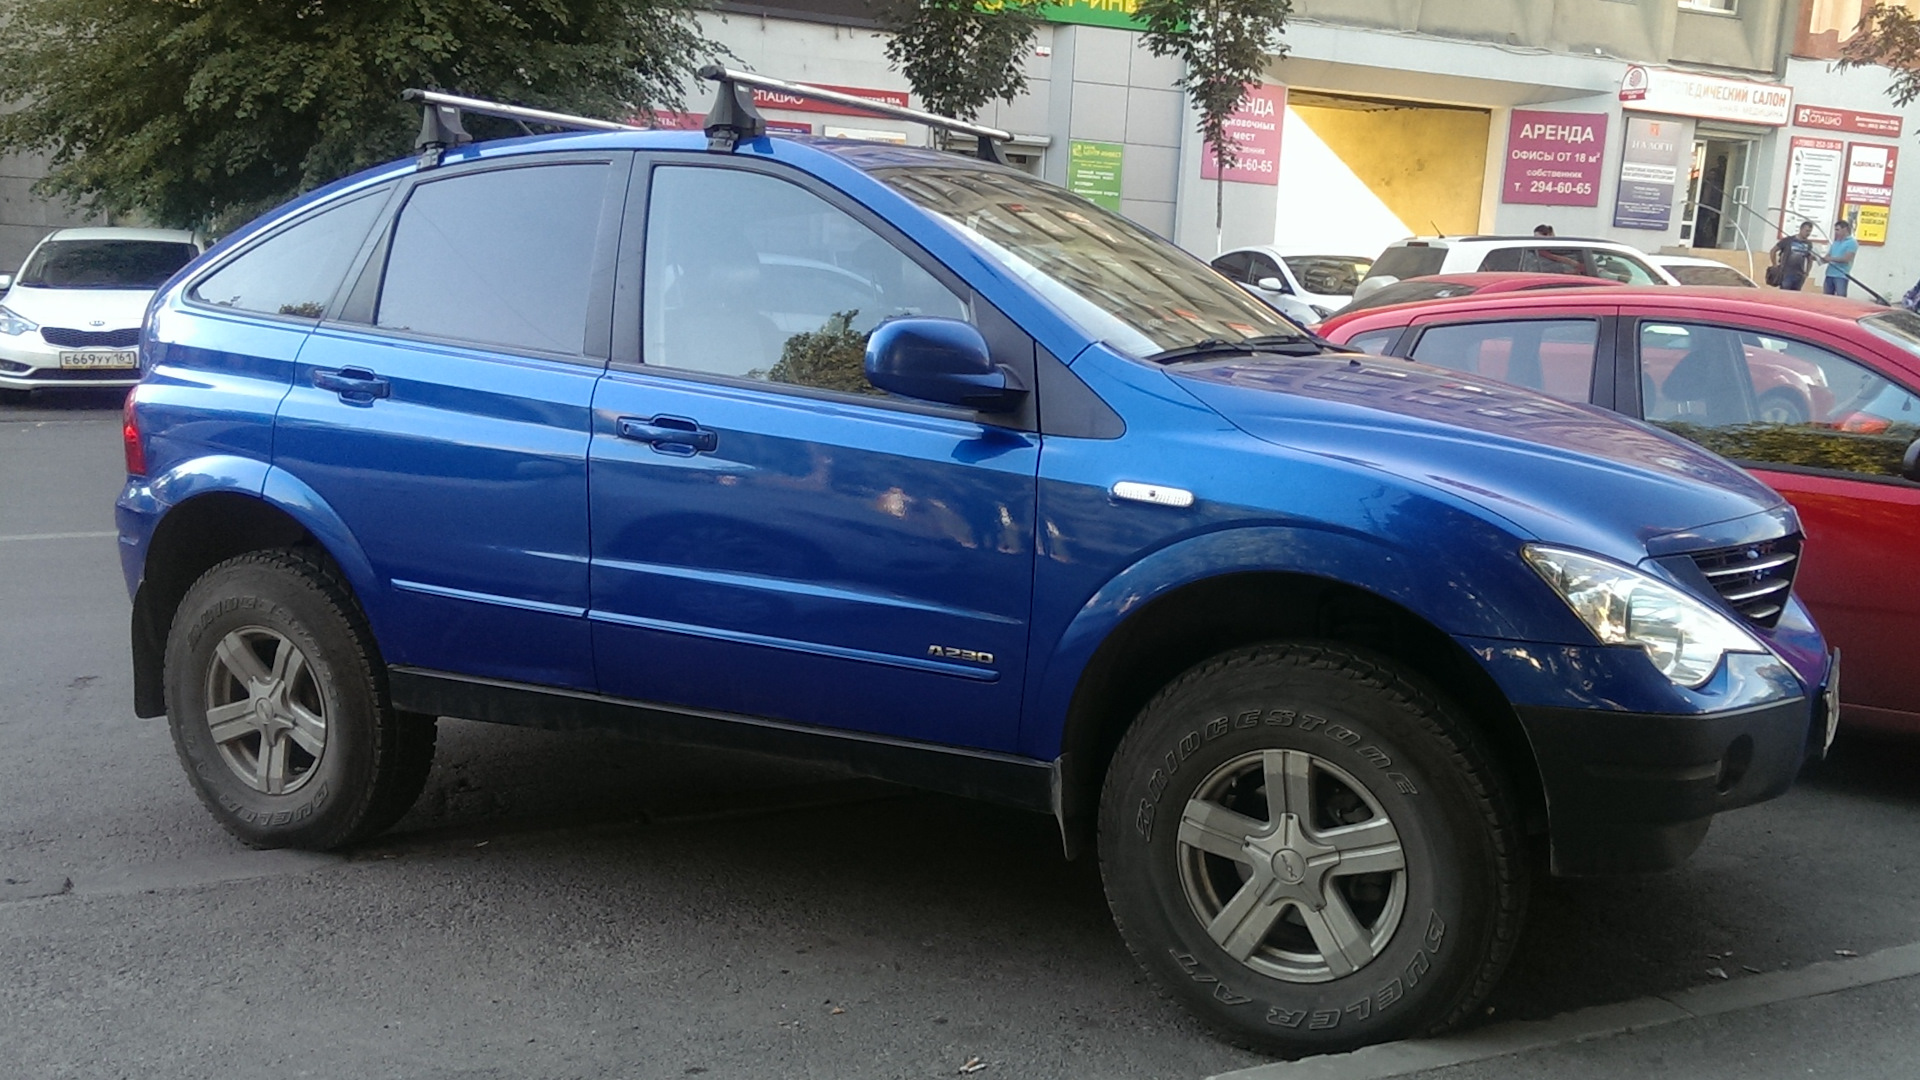 Actyon SSANGYONG А 888 АА 111. Саньенг Актион 1. SSANGYONG Actyon 2007 года. SSANGYONG Actyon 2.3 МТ, 2007. Запчасти саньенг актион